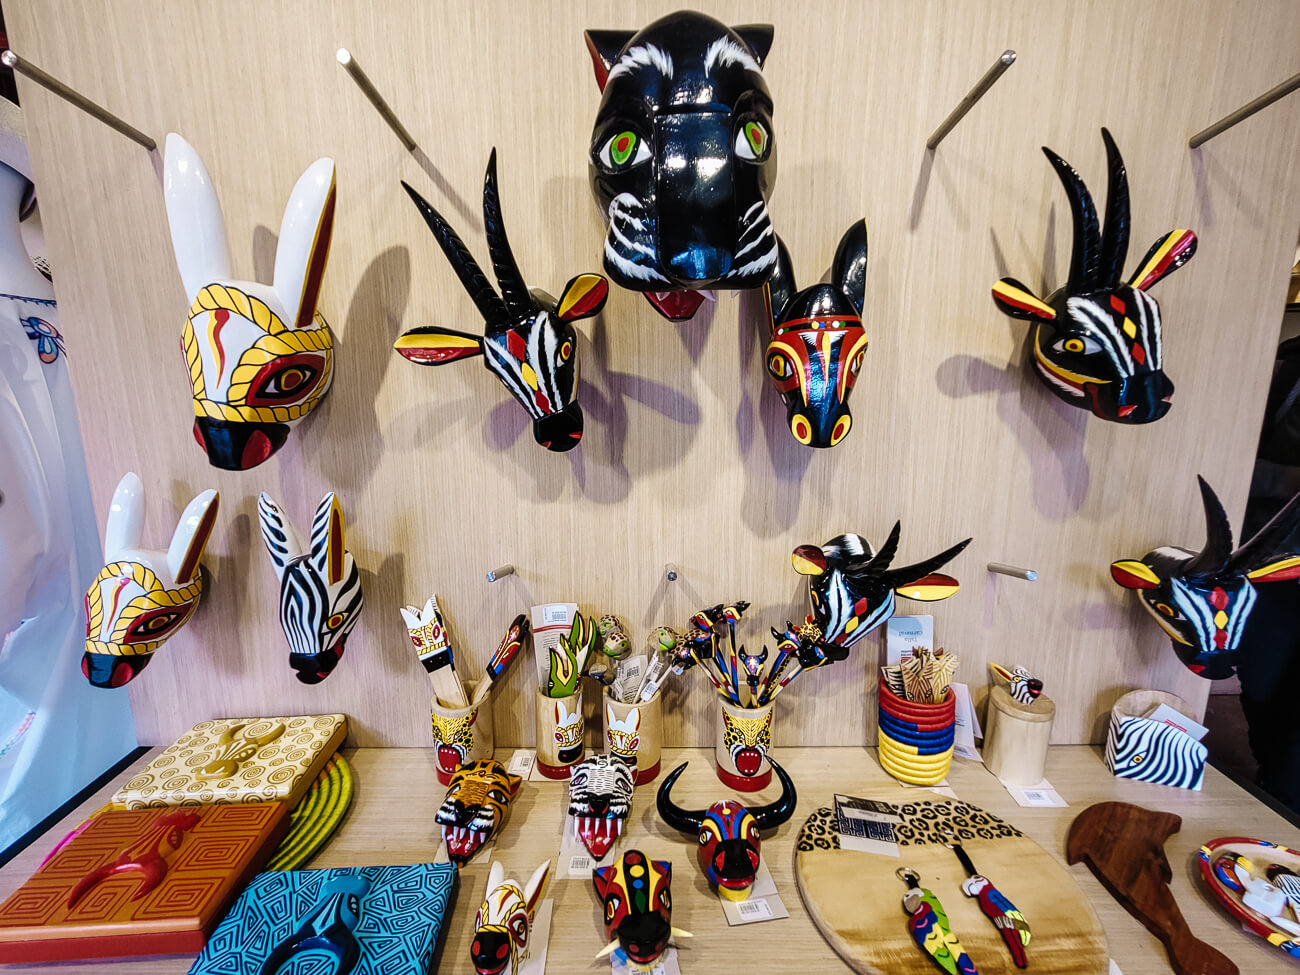 Store of Artesanías de Colombia, an organization dedicated to local people and their crafts. 
